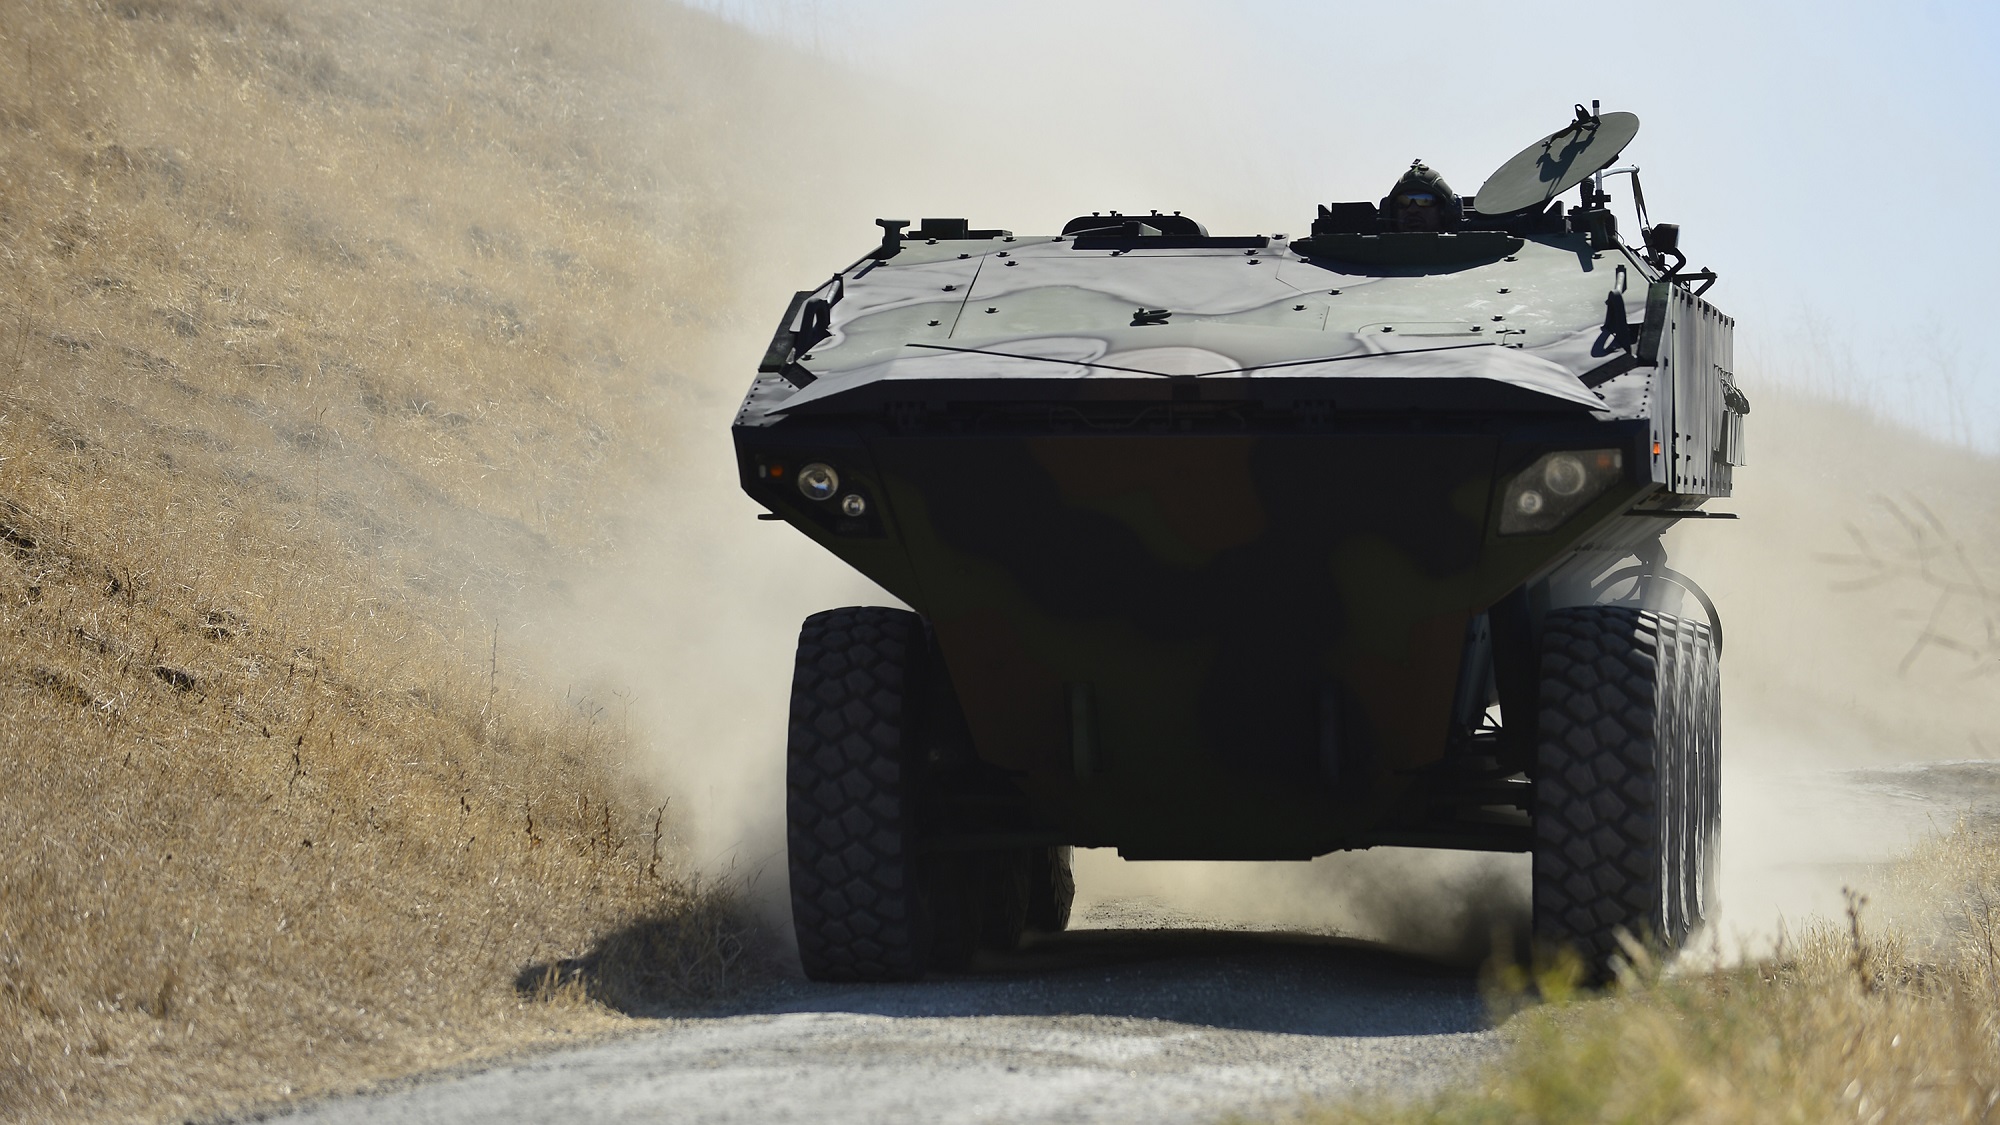 BAE Systems to Build 26 Amphibious Combat Vehicles for the Marines